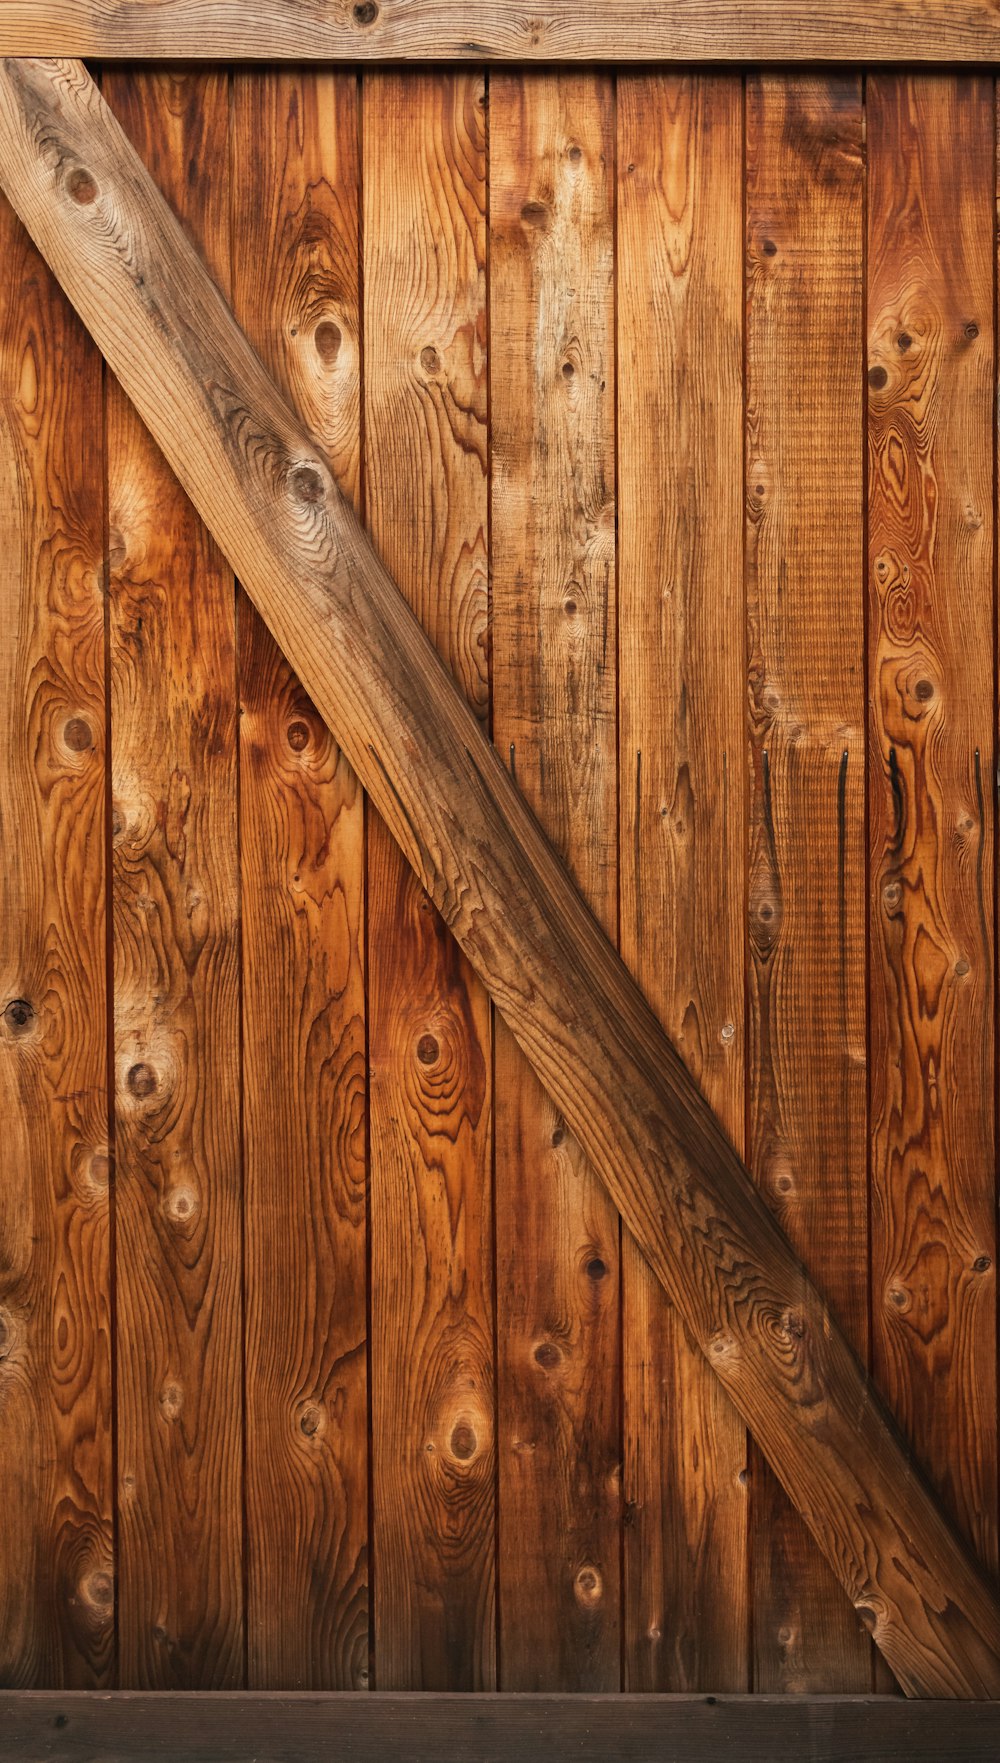 a close up of a wooden fence with a wooden pole